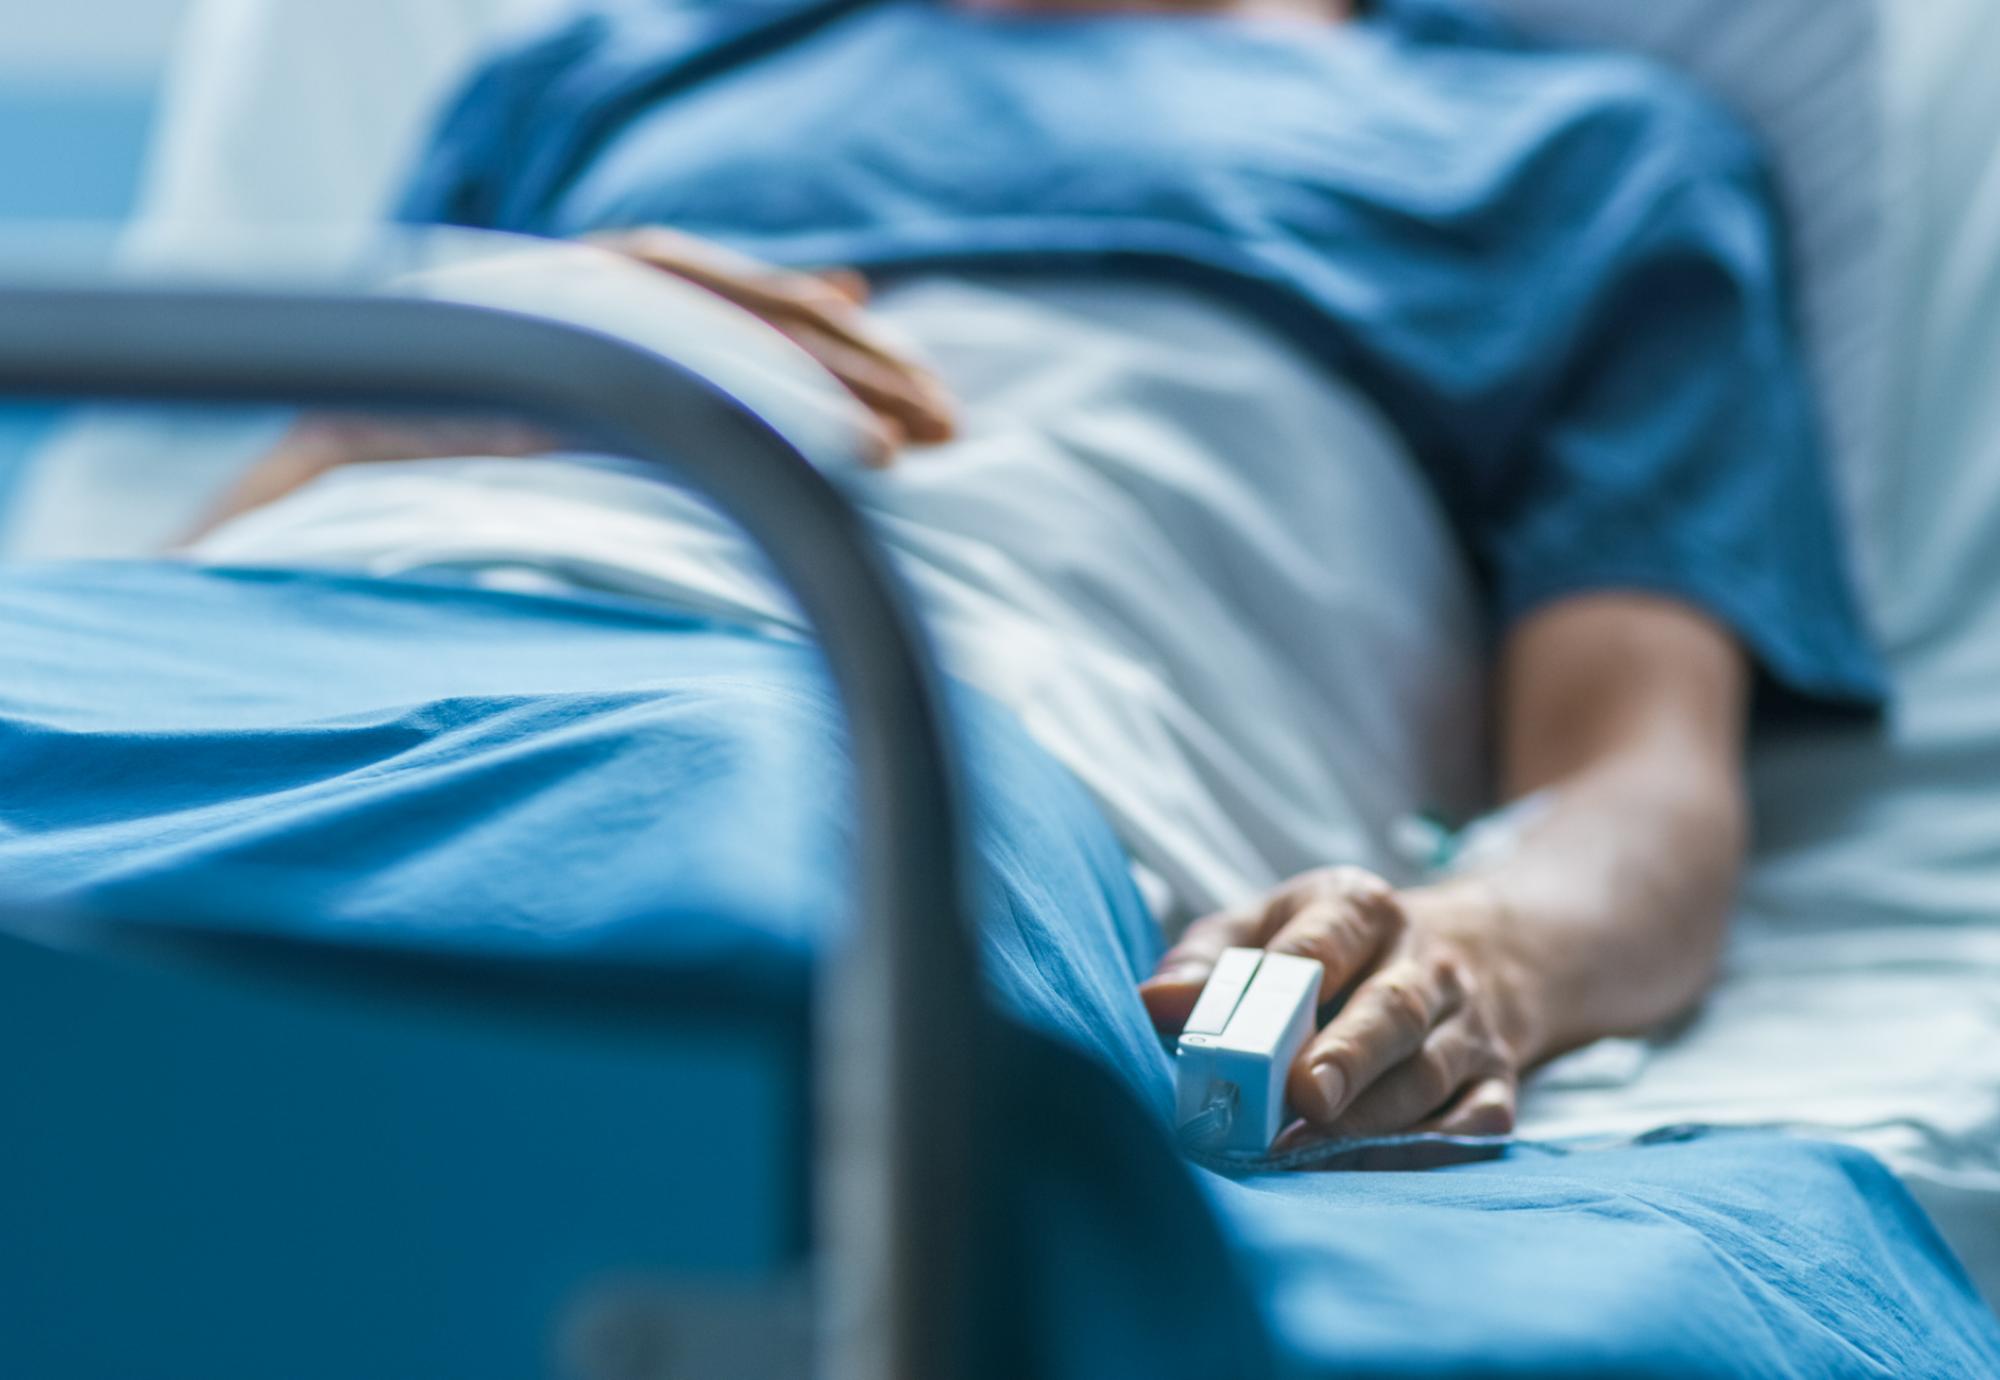 Generic photo of a patient in a hospital bed